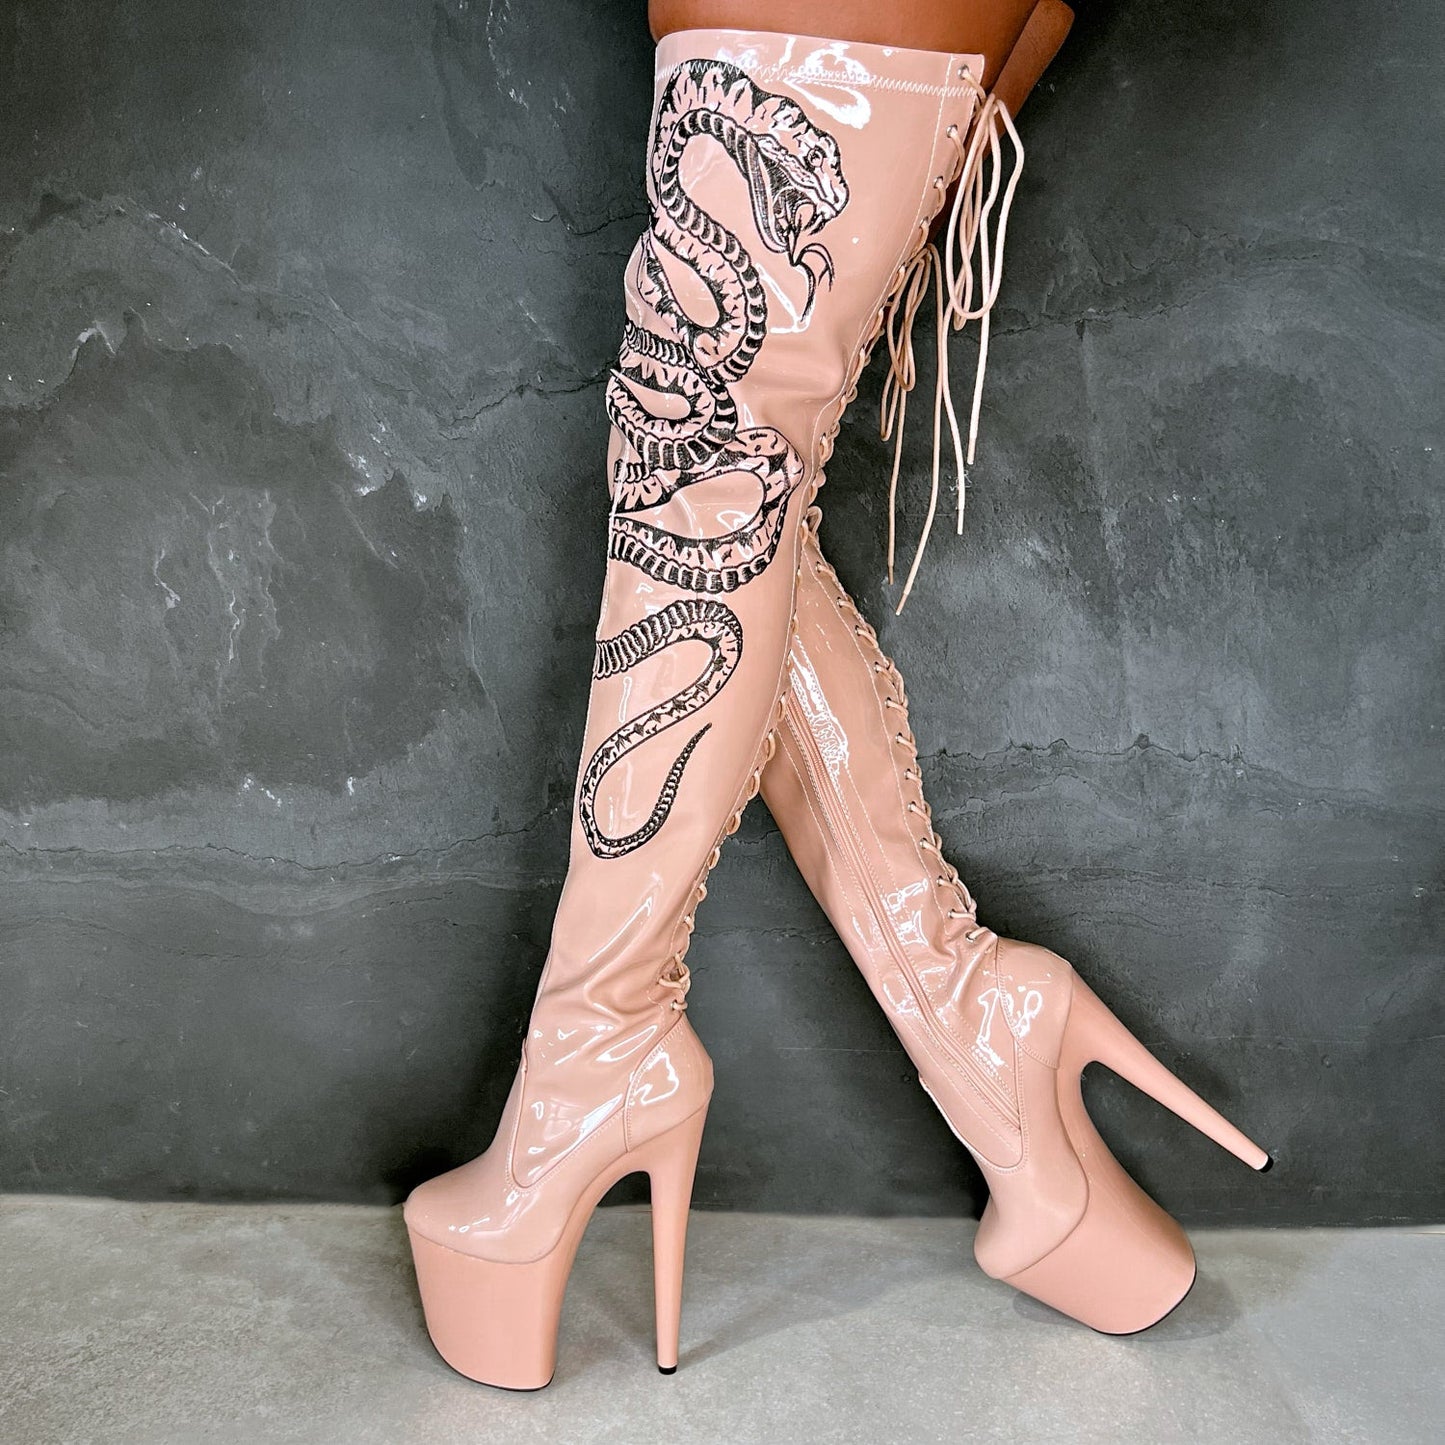 VIPER Boot Tan with Black Thigh High - 8INCH